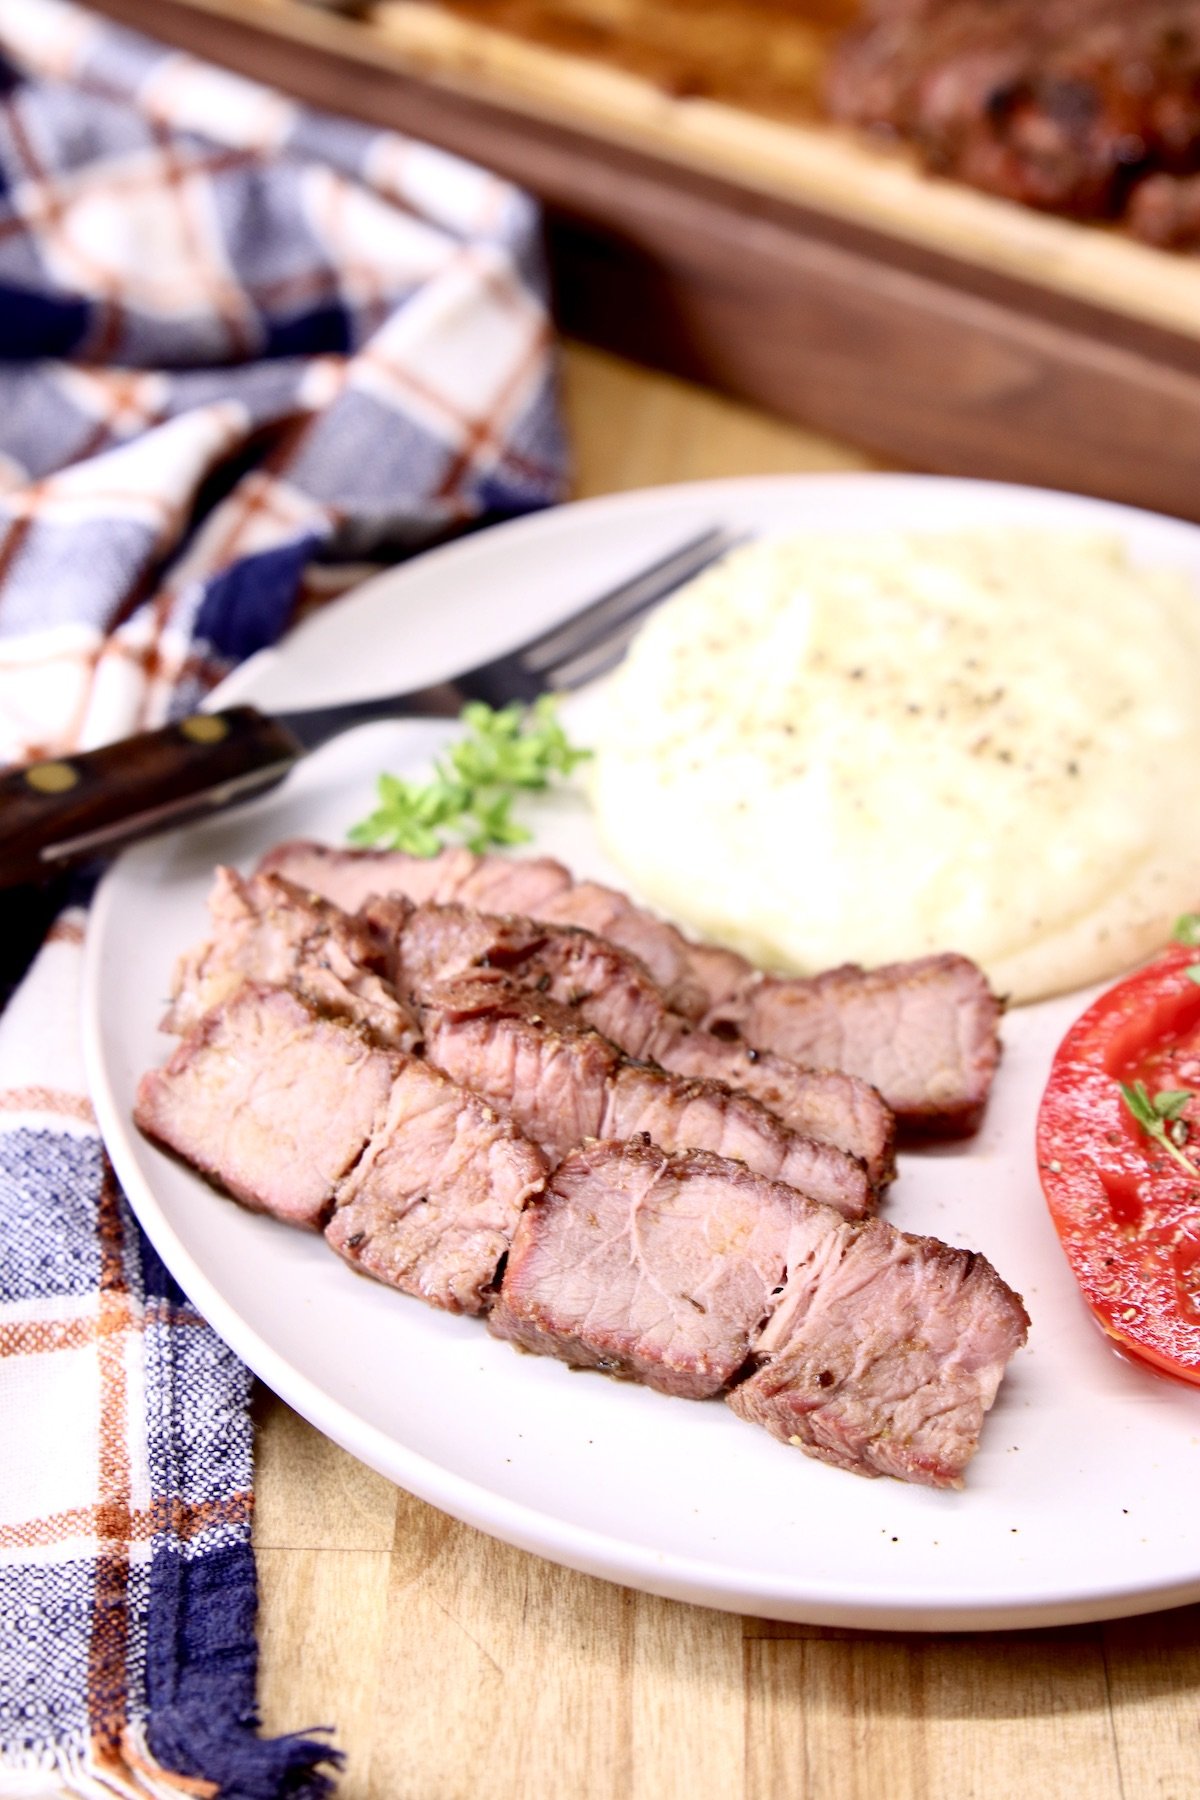 Grilled roast beef slices on a plate with mashed potatoes